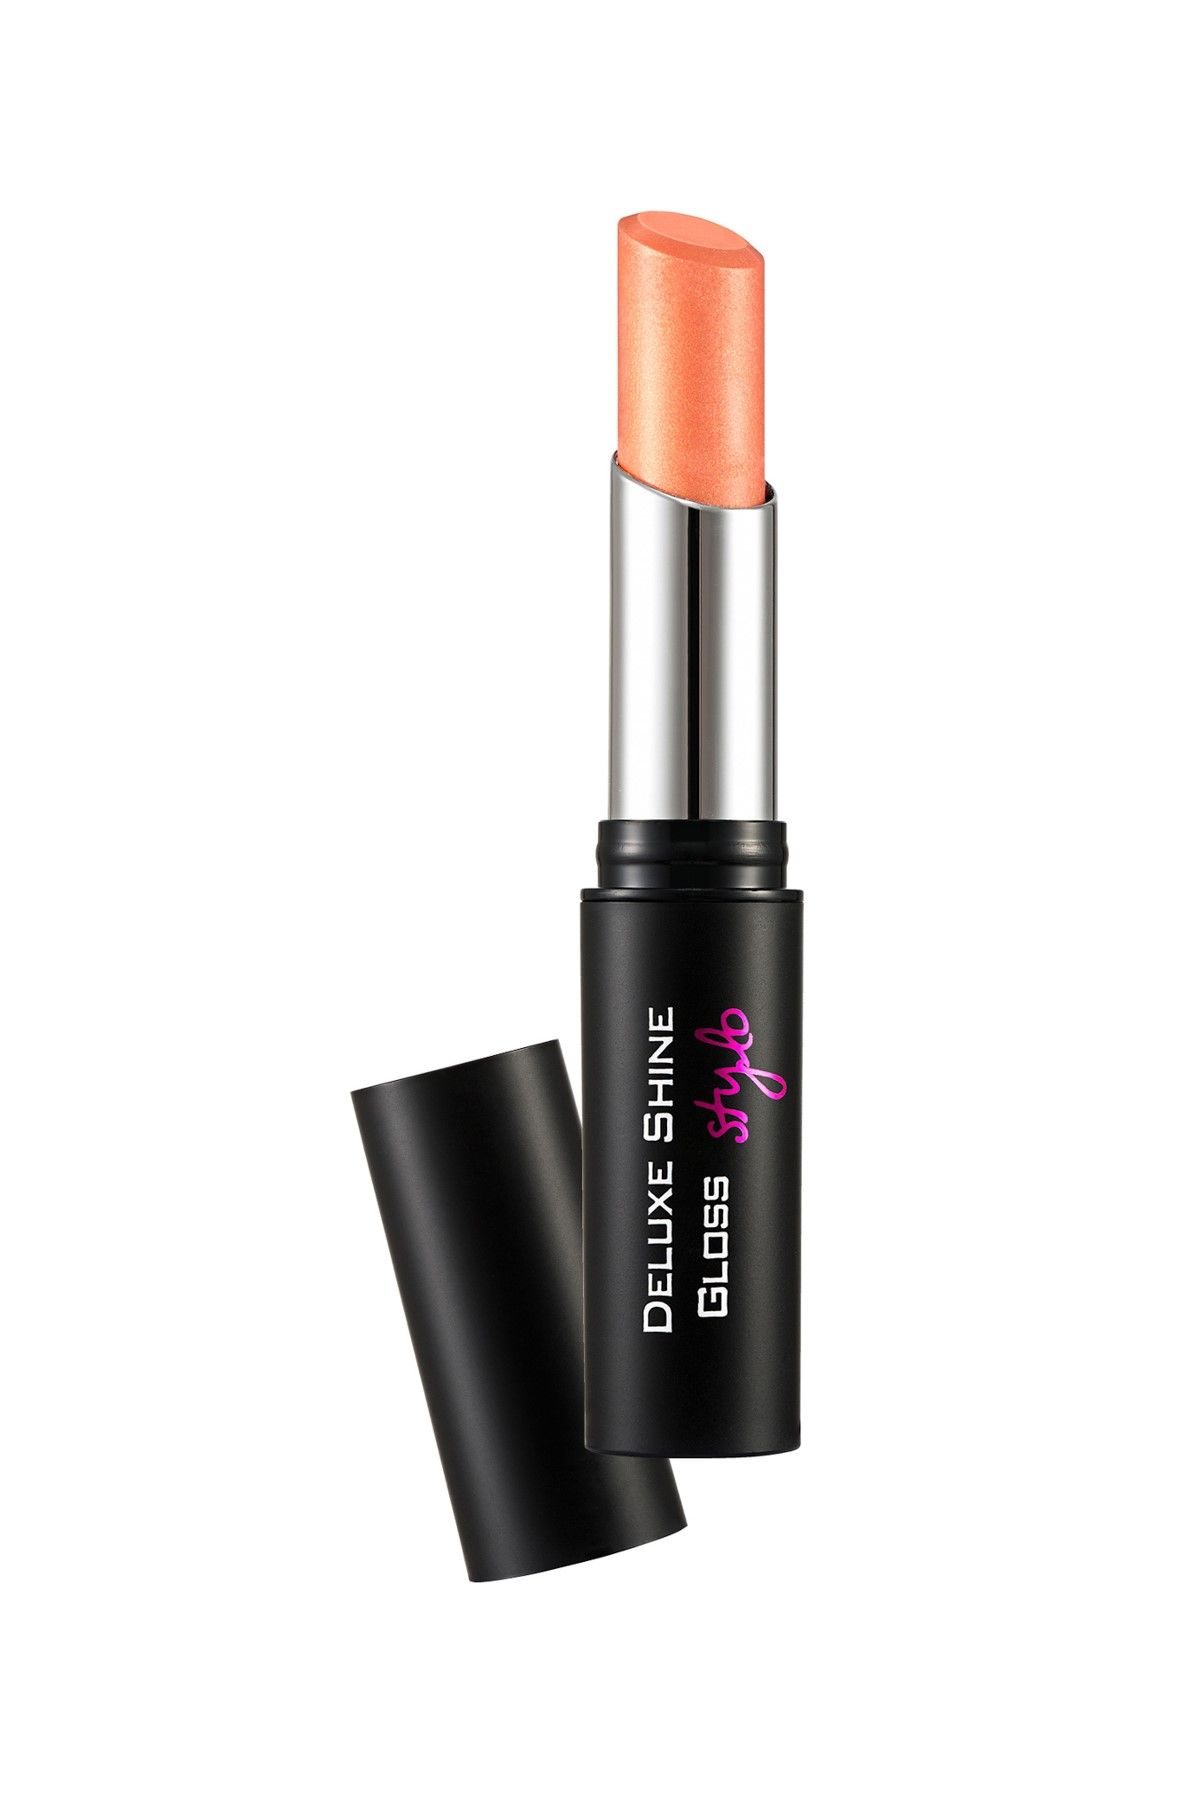 Flormar Ruj - Deluxe Shine Gloss Stylo Just Coral 8690604209545